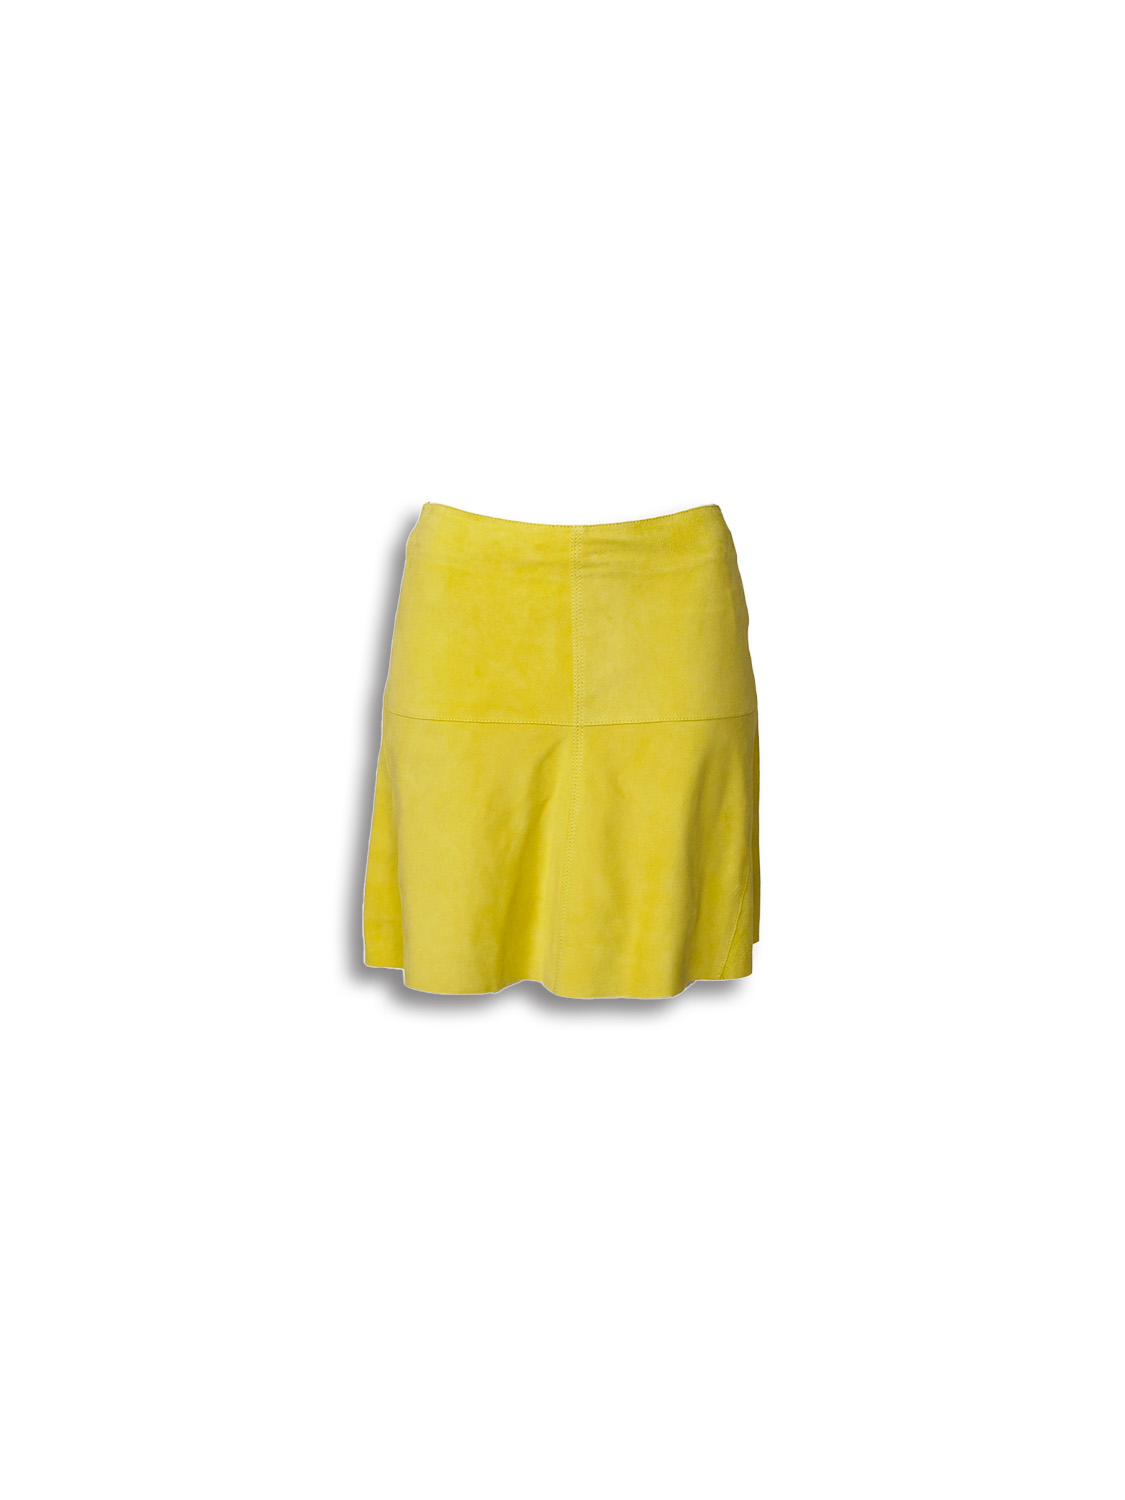 Mia Goat Suede - A-line suede mini skirt